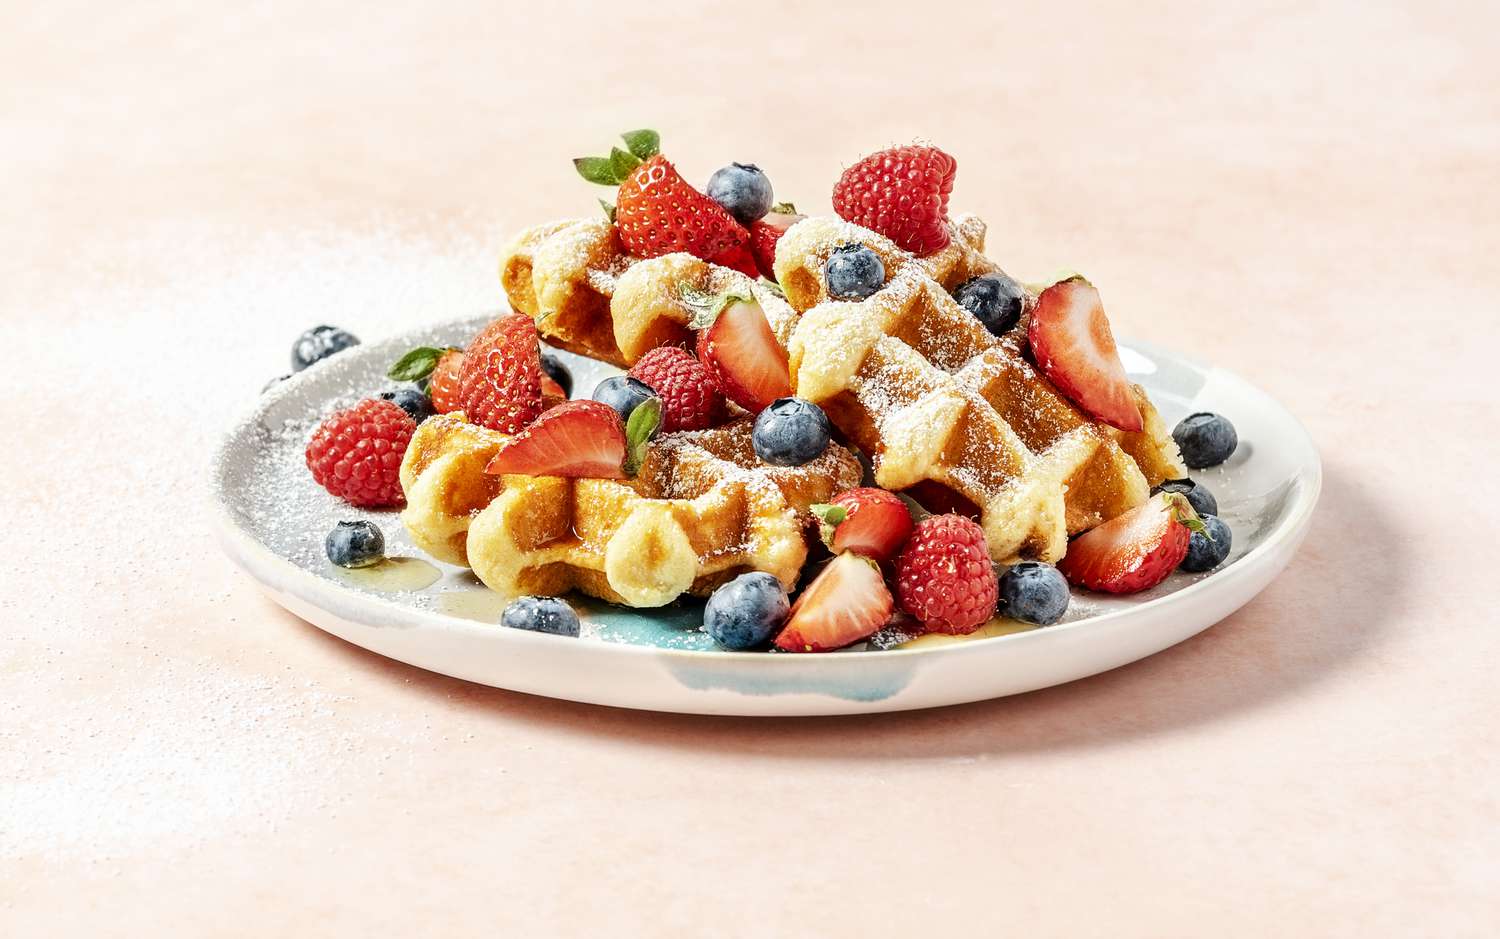 A plate of waffles with berries on peach background - stock photo